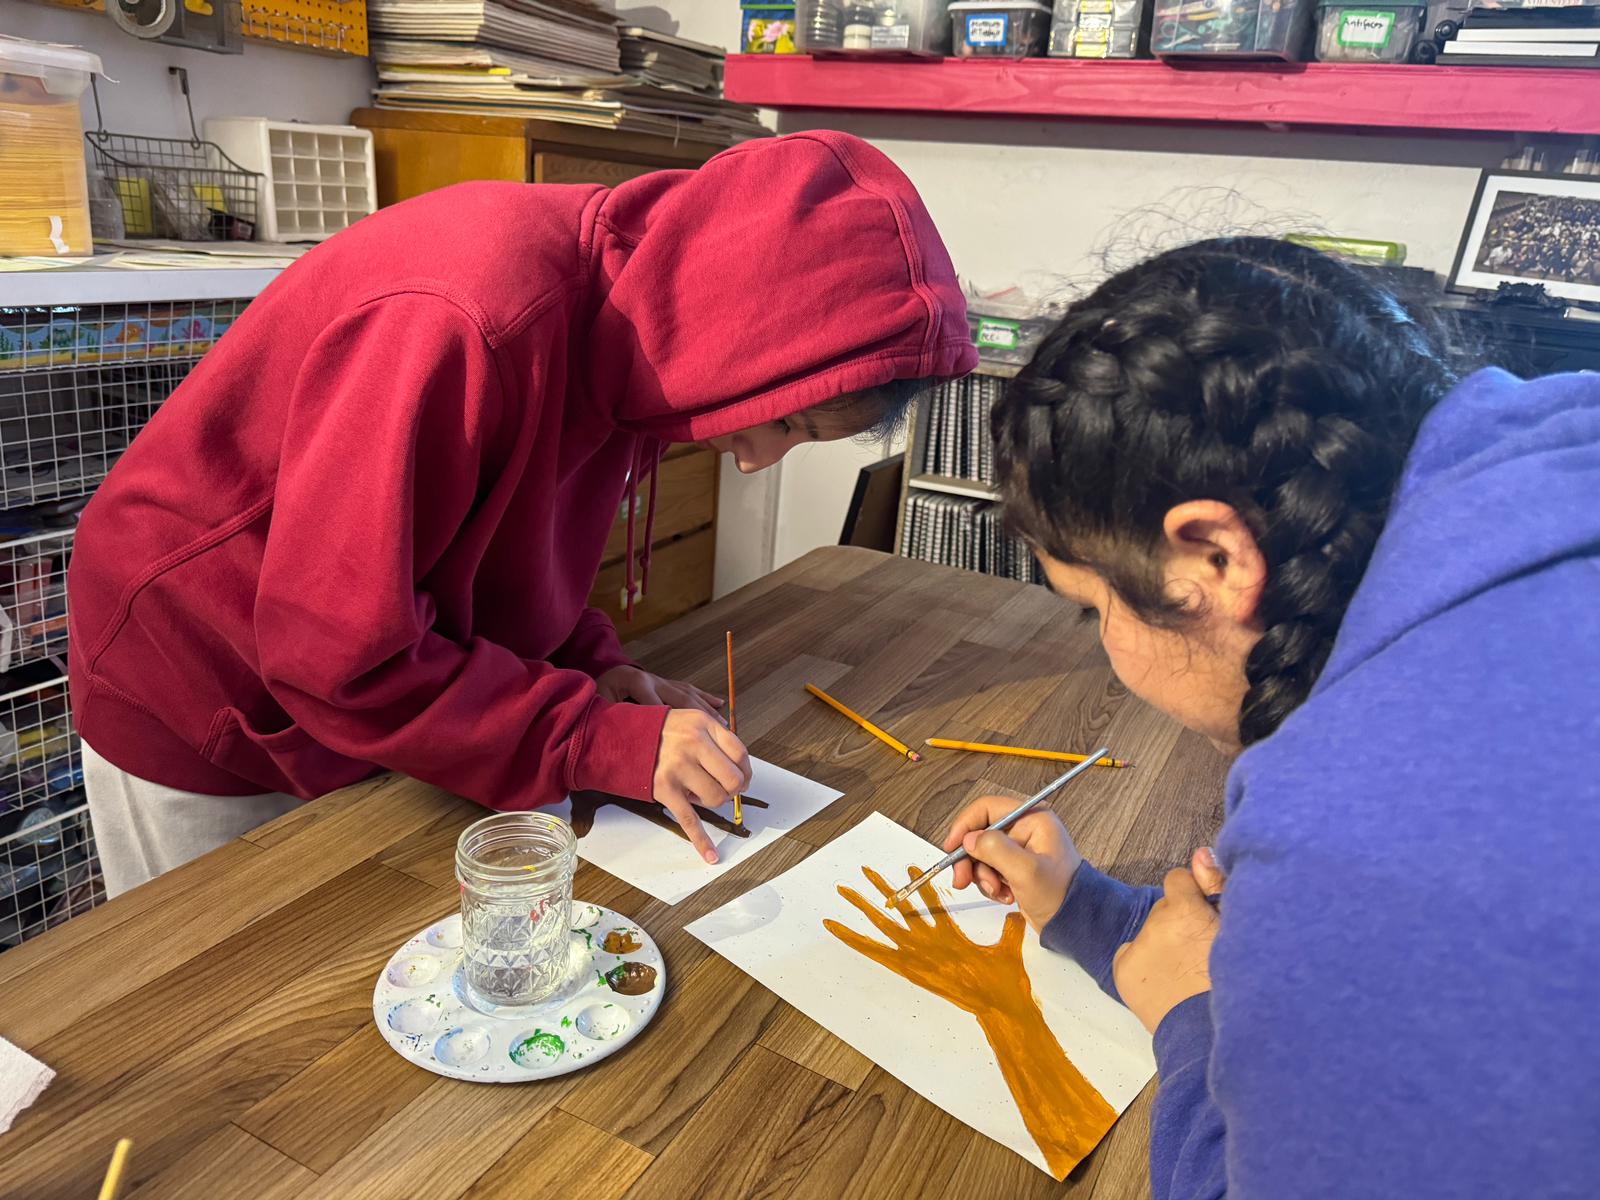 Children from Casa Círculo Cultural use art to counteract hate